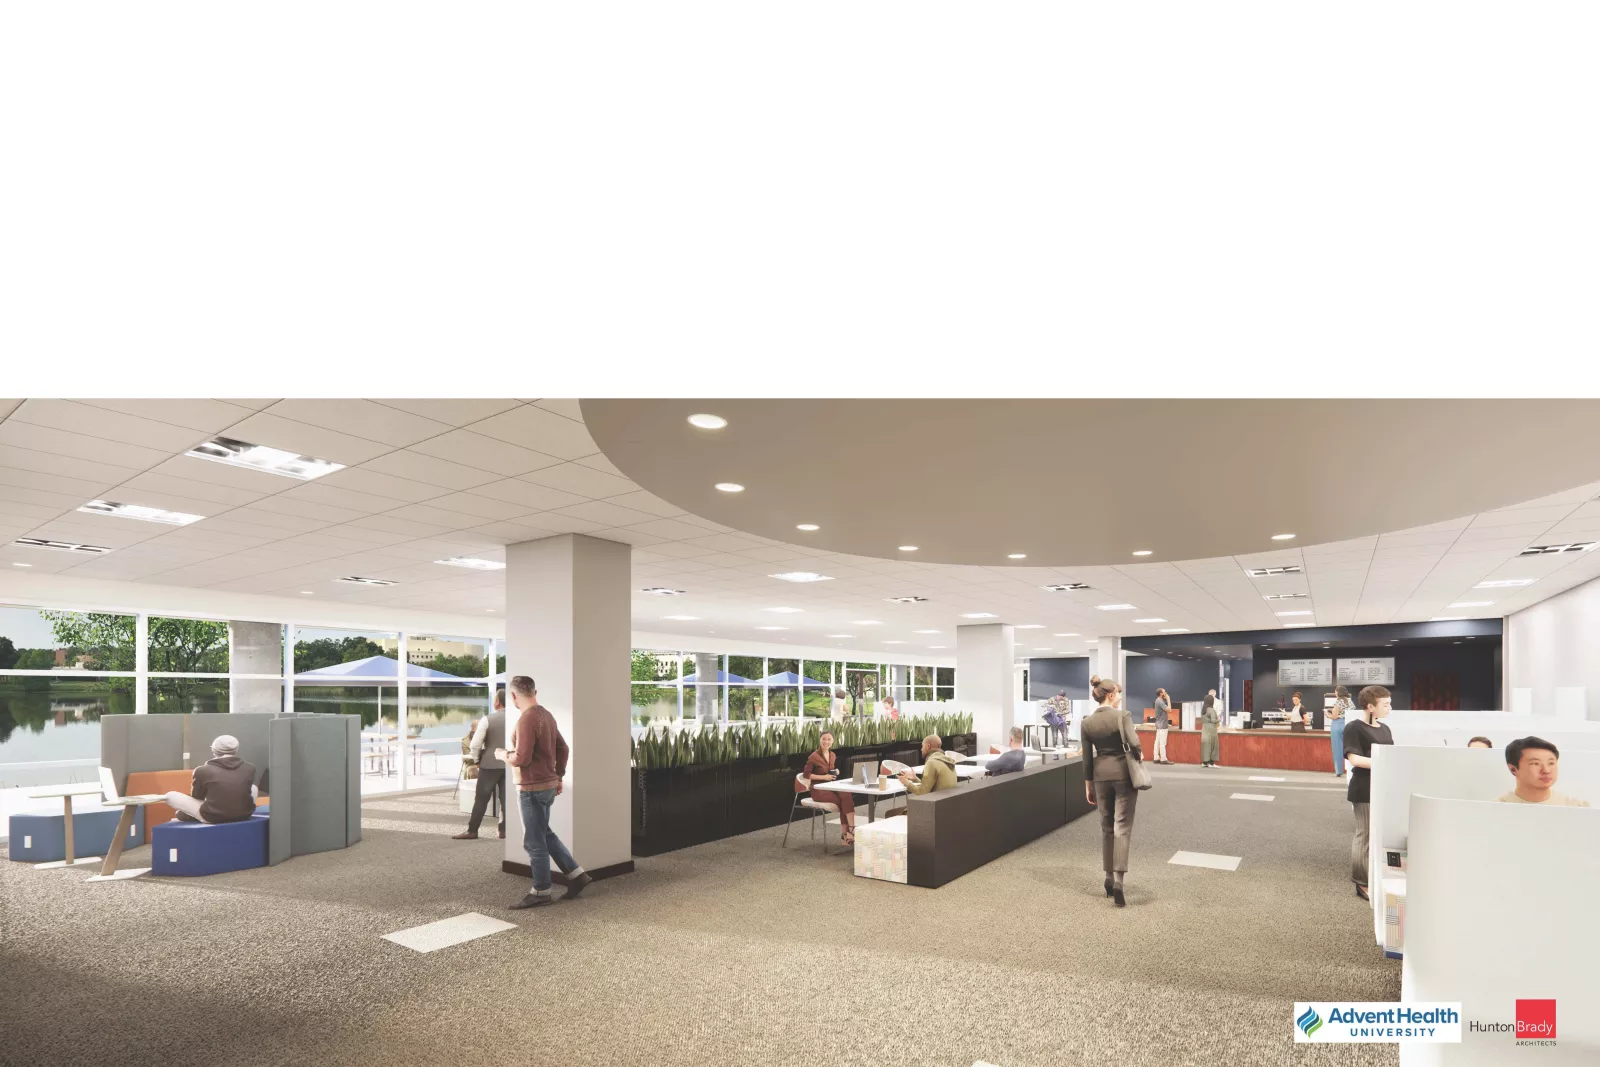 Rendering of the new student center at AHU